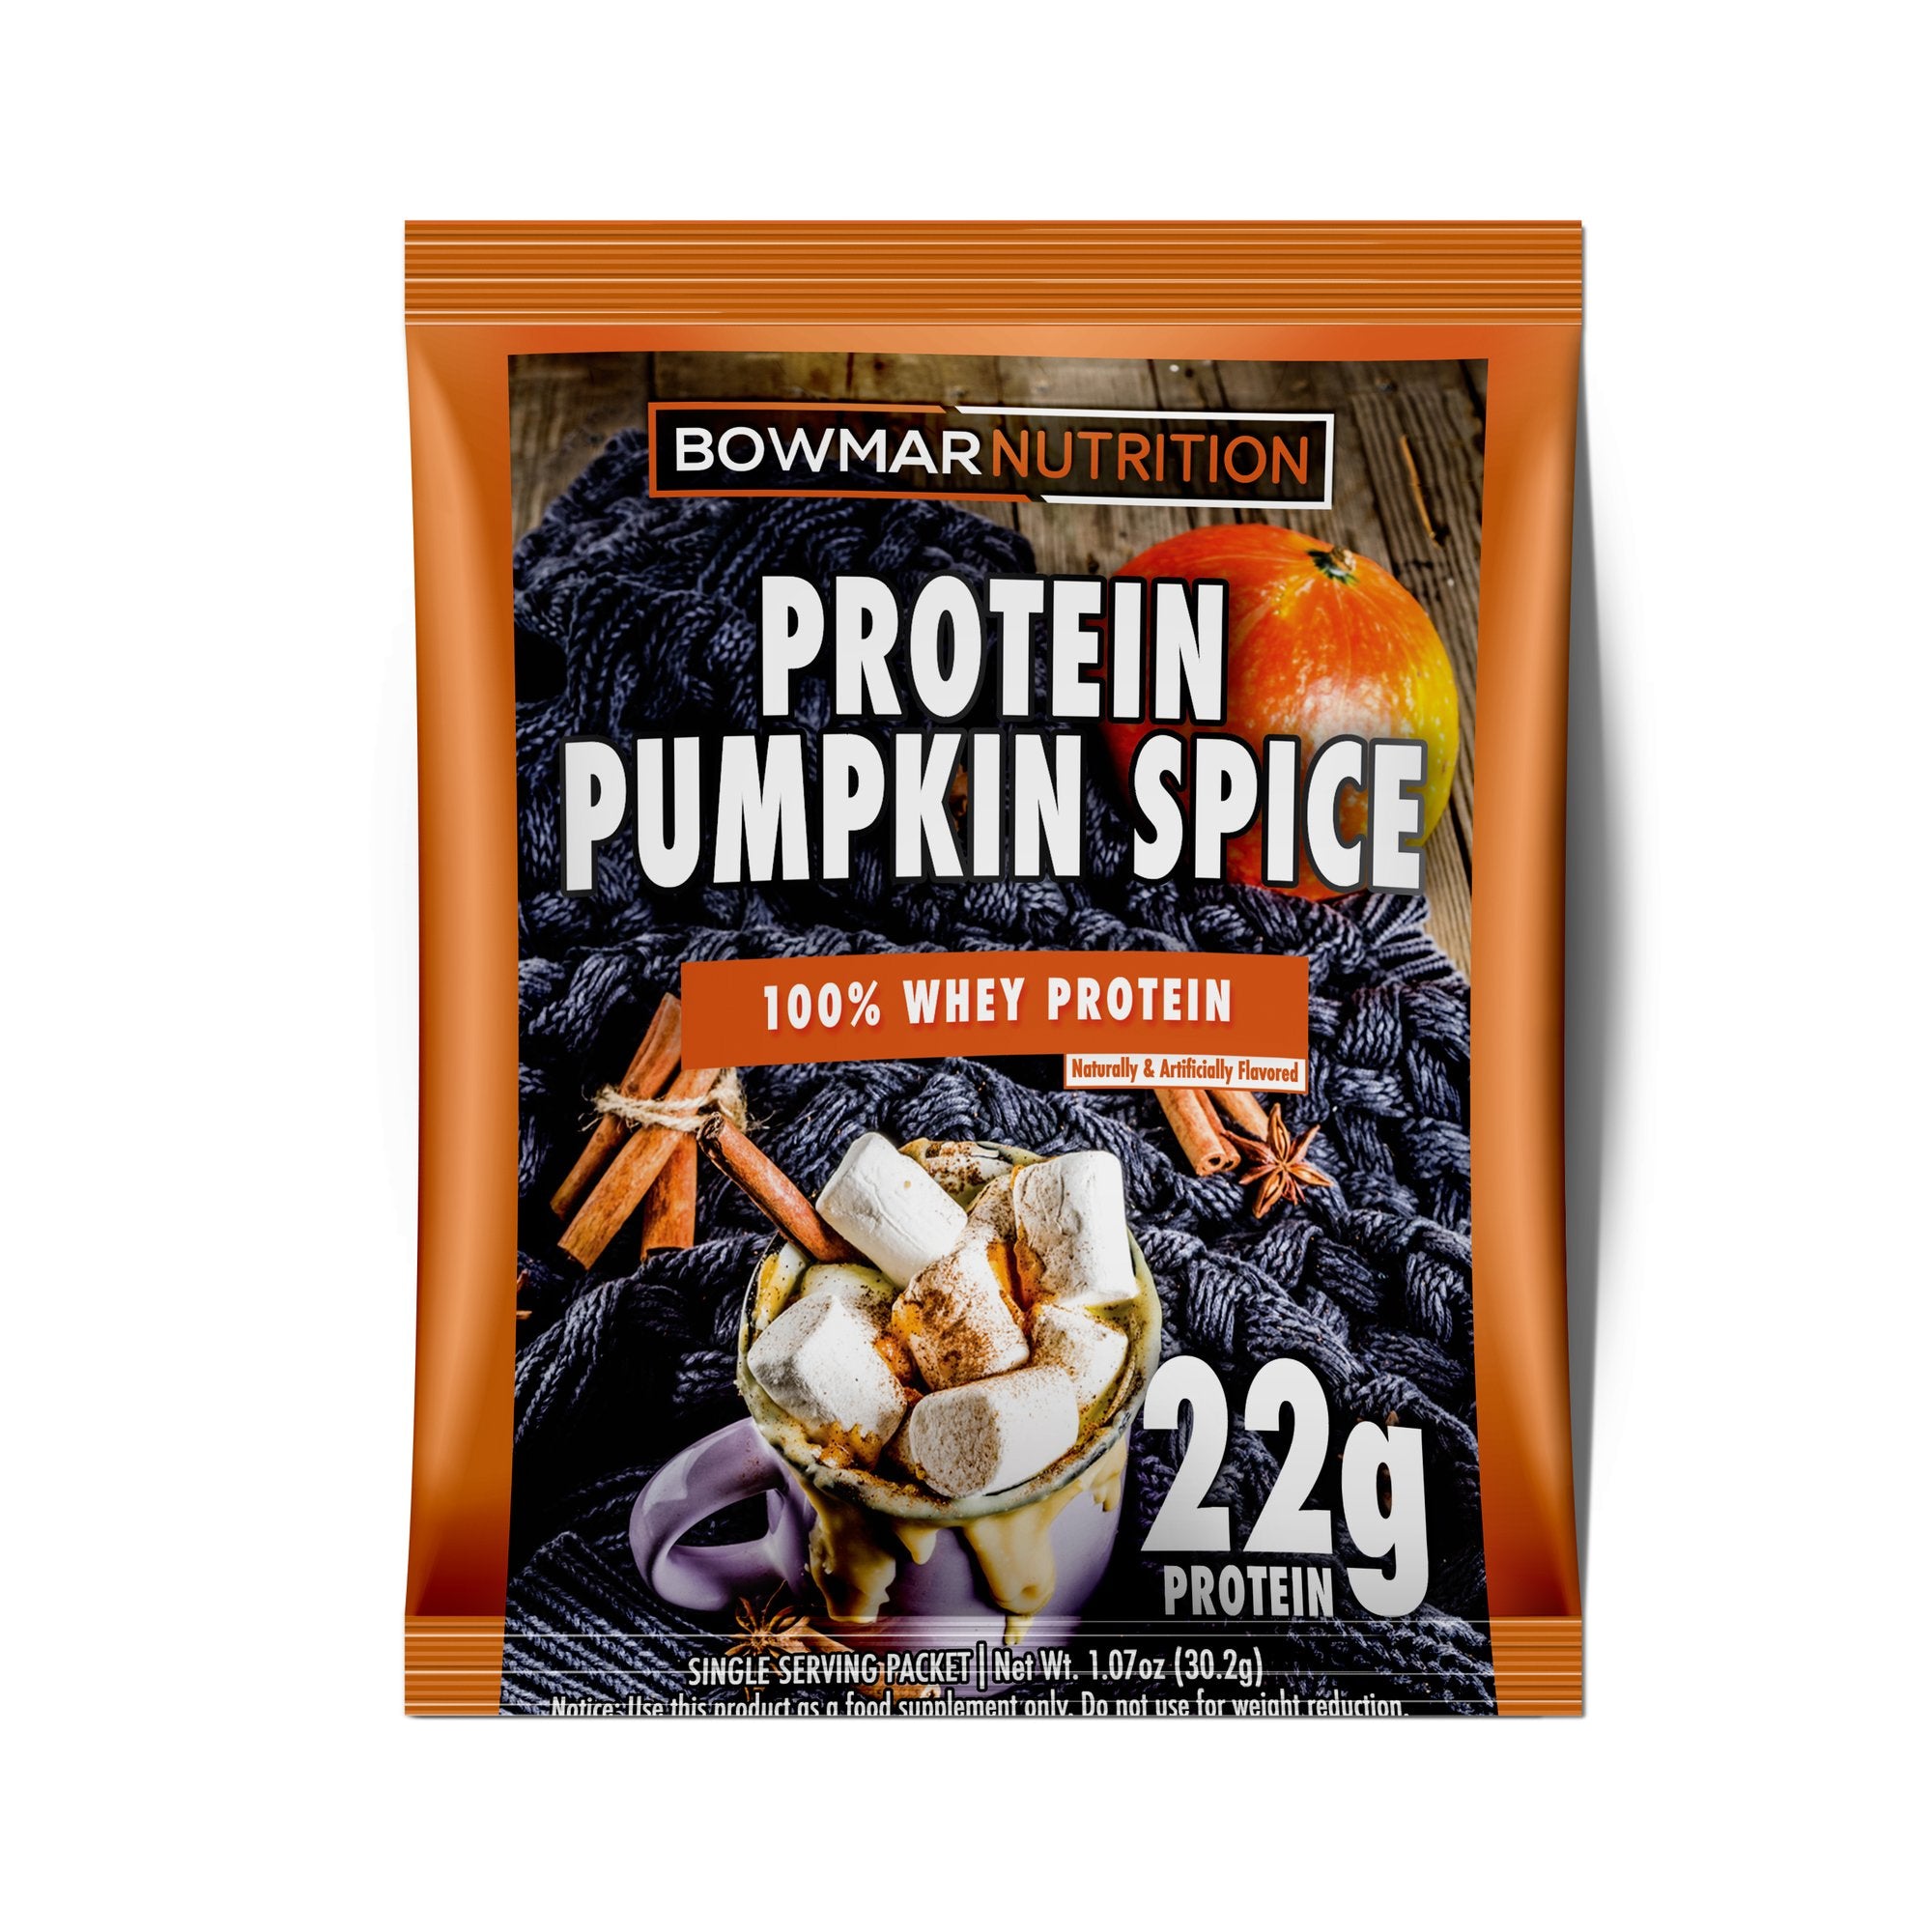 Bowmar Whey Protein Powder Sample (1 serving) bowmar-protein-powder-sachet-1-packet Protein Snacks Pumpkin Spice BEST BY 11/2022 bowmar